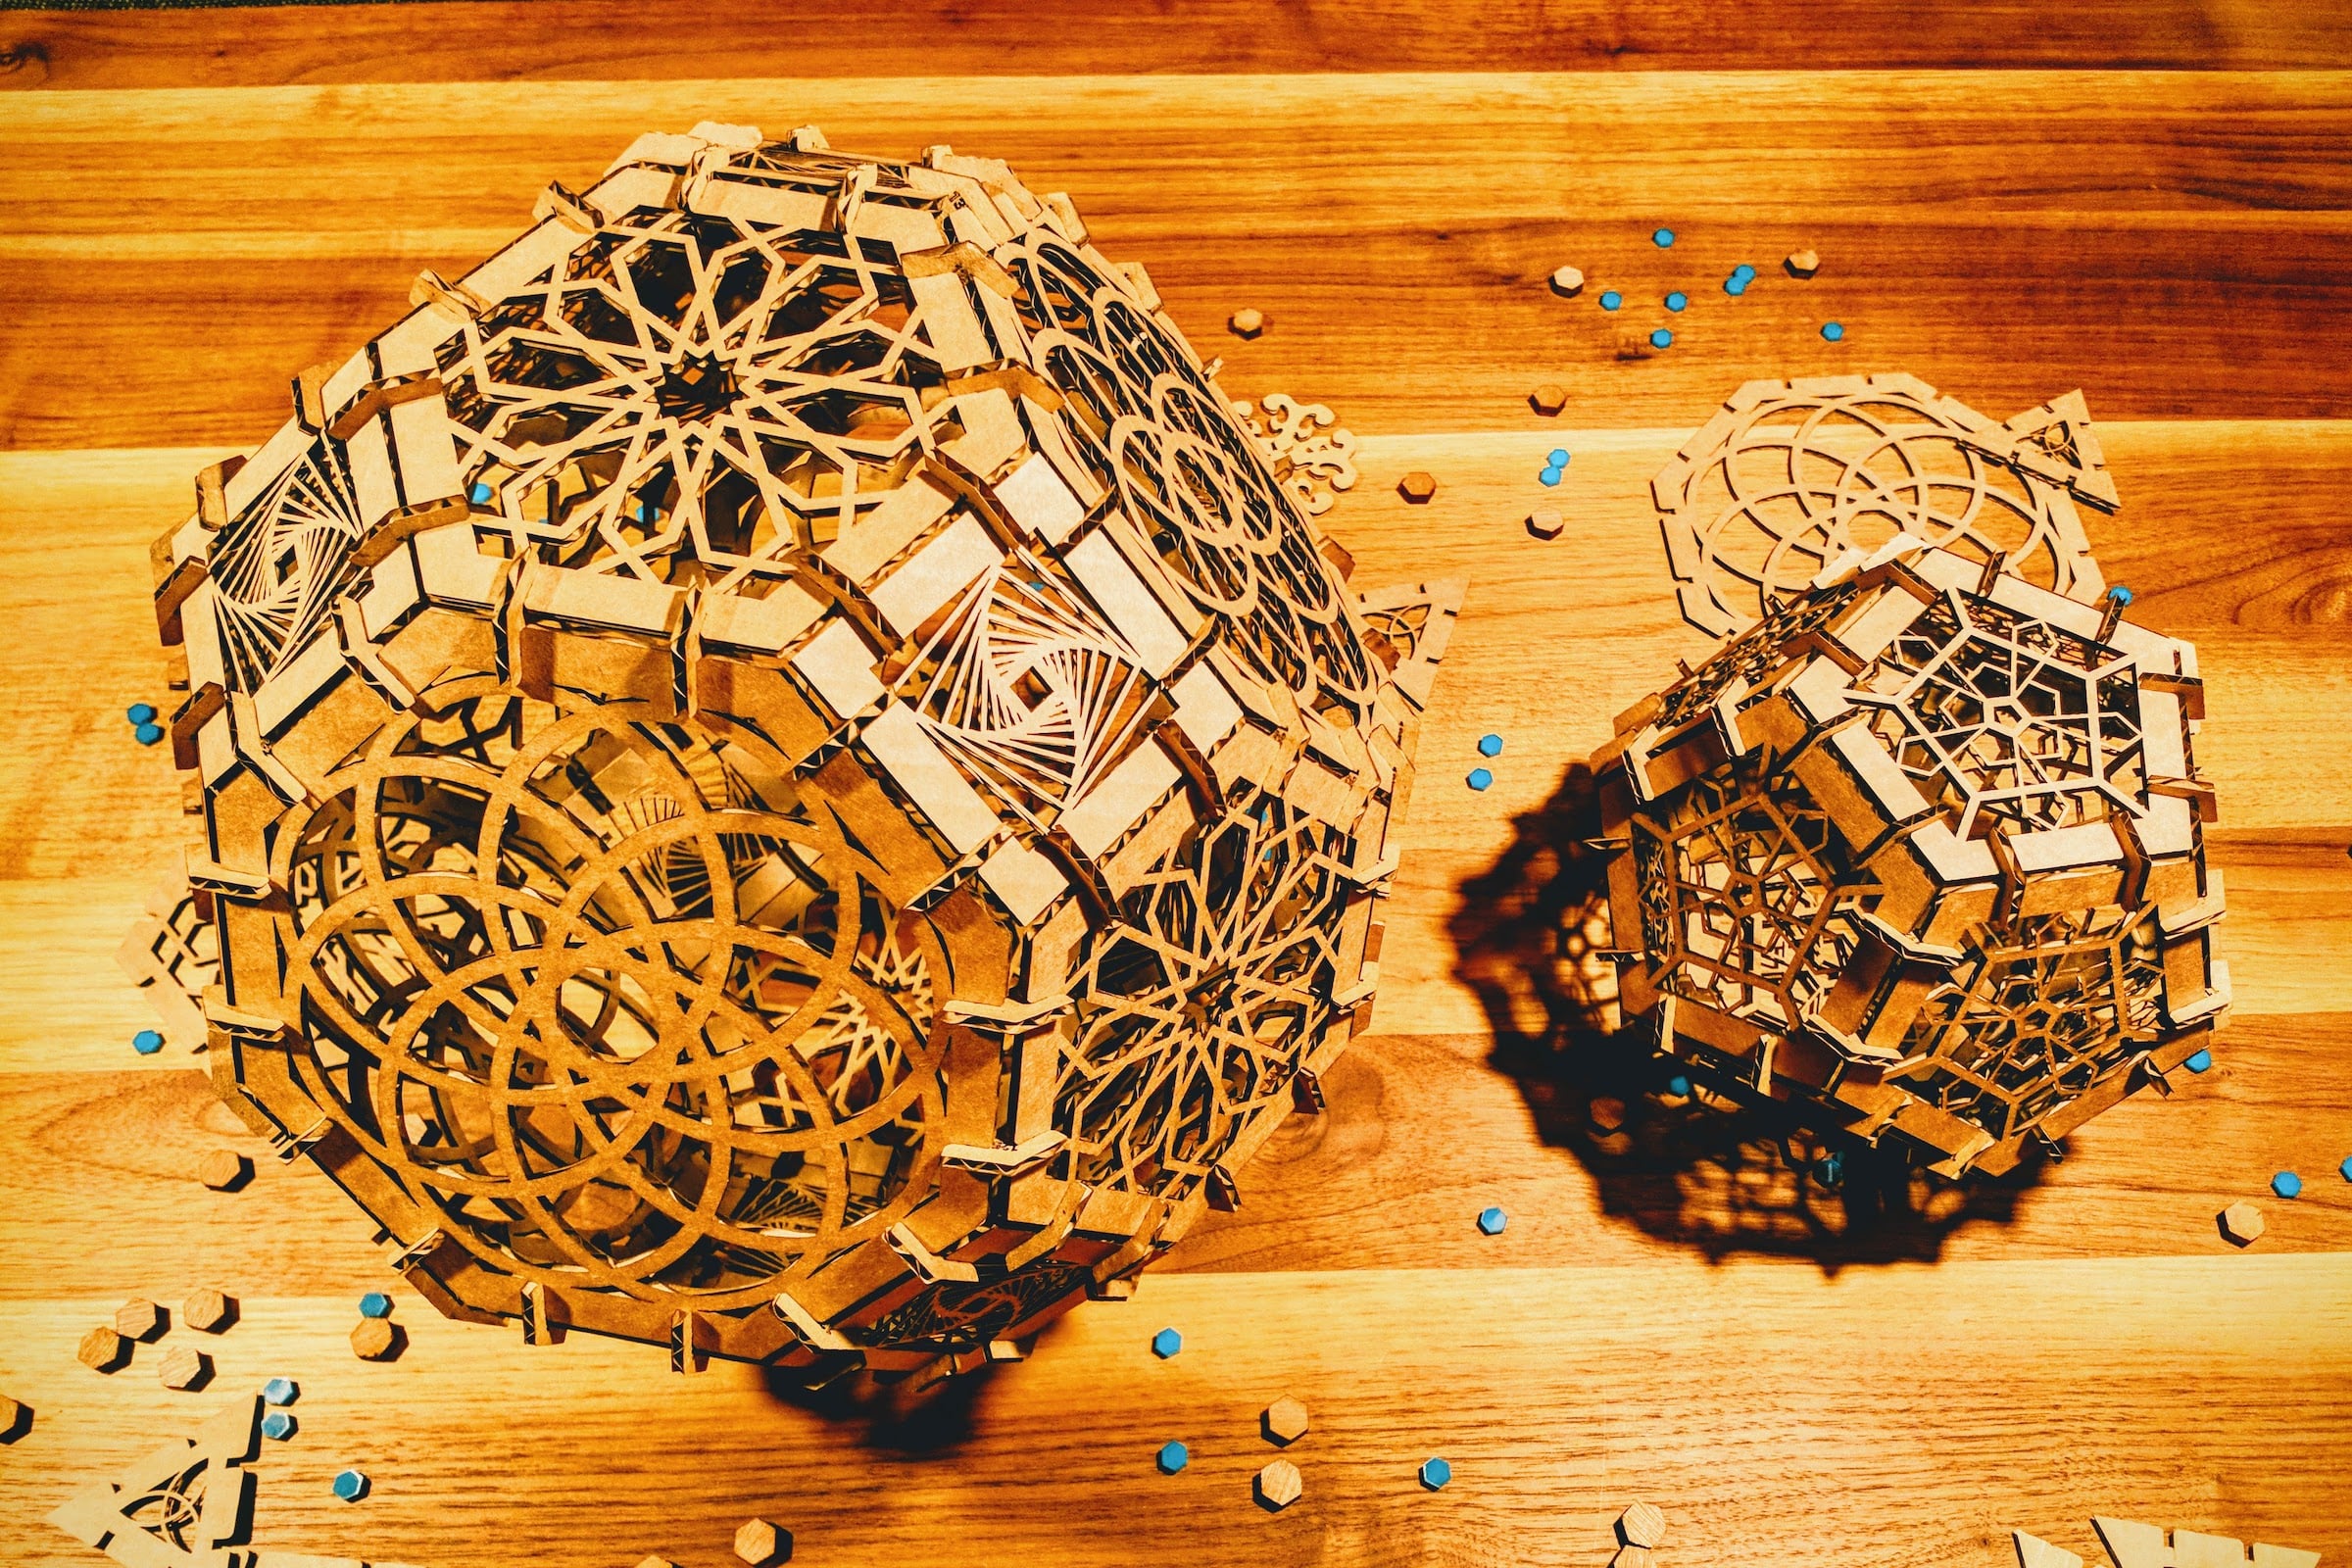 Creating Archimedean solids during the laser cutting week